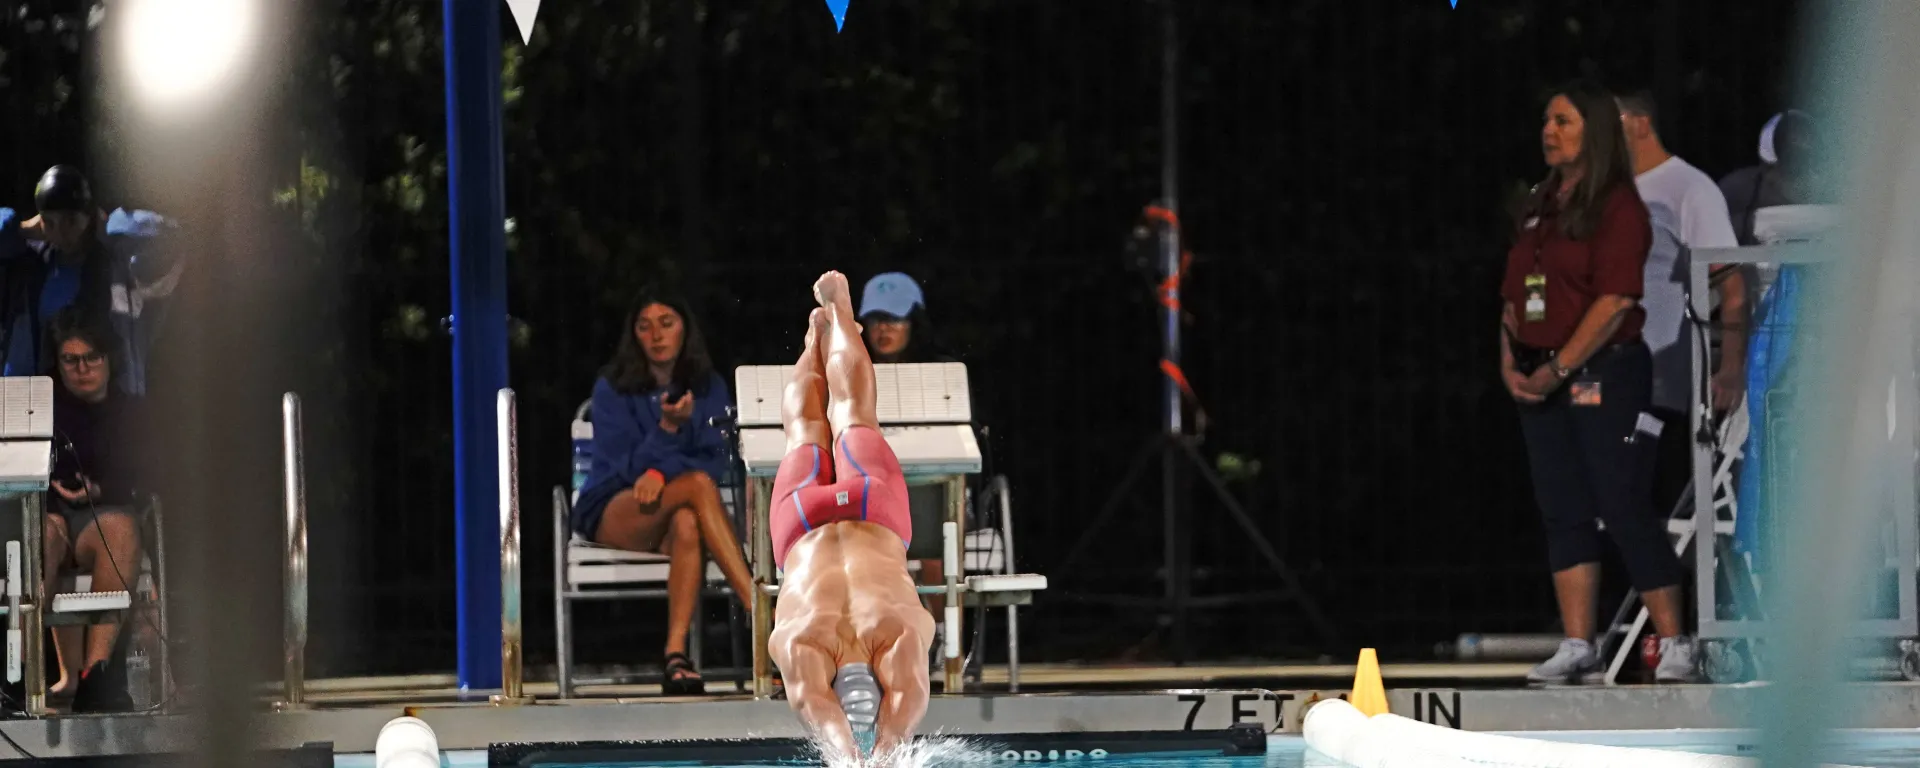 Image of a swimmer diving into the lap pool at Sailfish Splash Waterpark